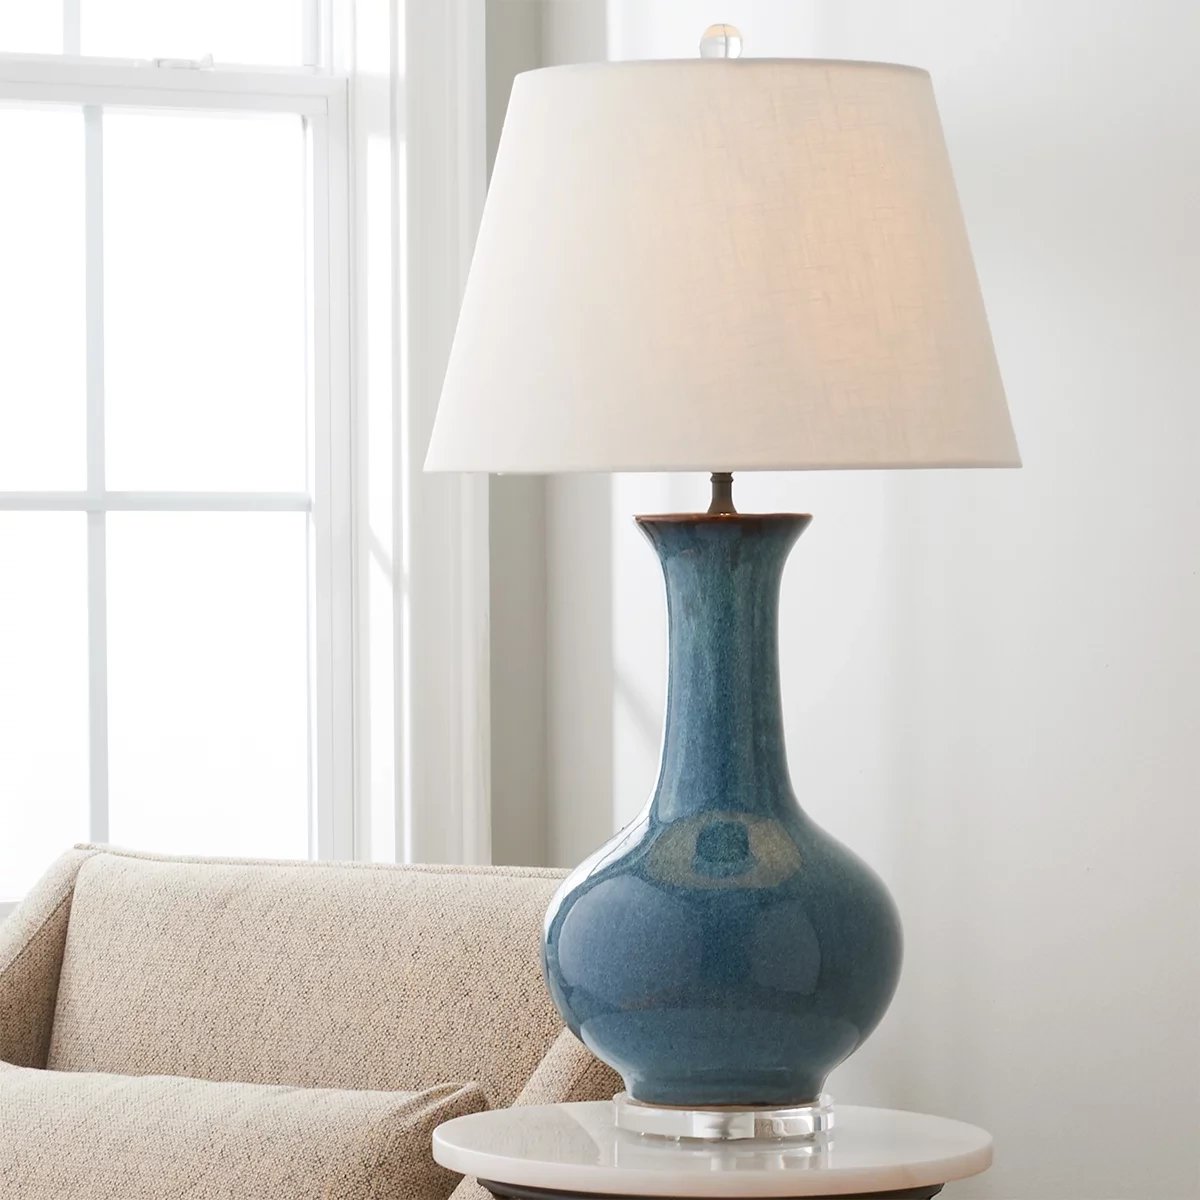 How To Paint A Ceramic Lamp Base